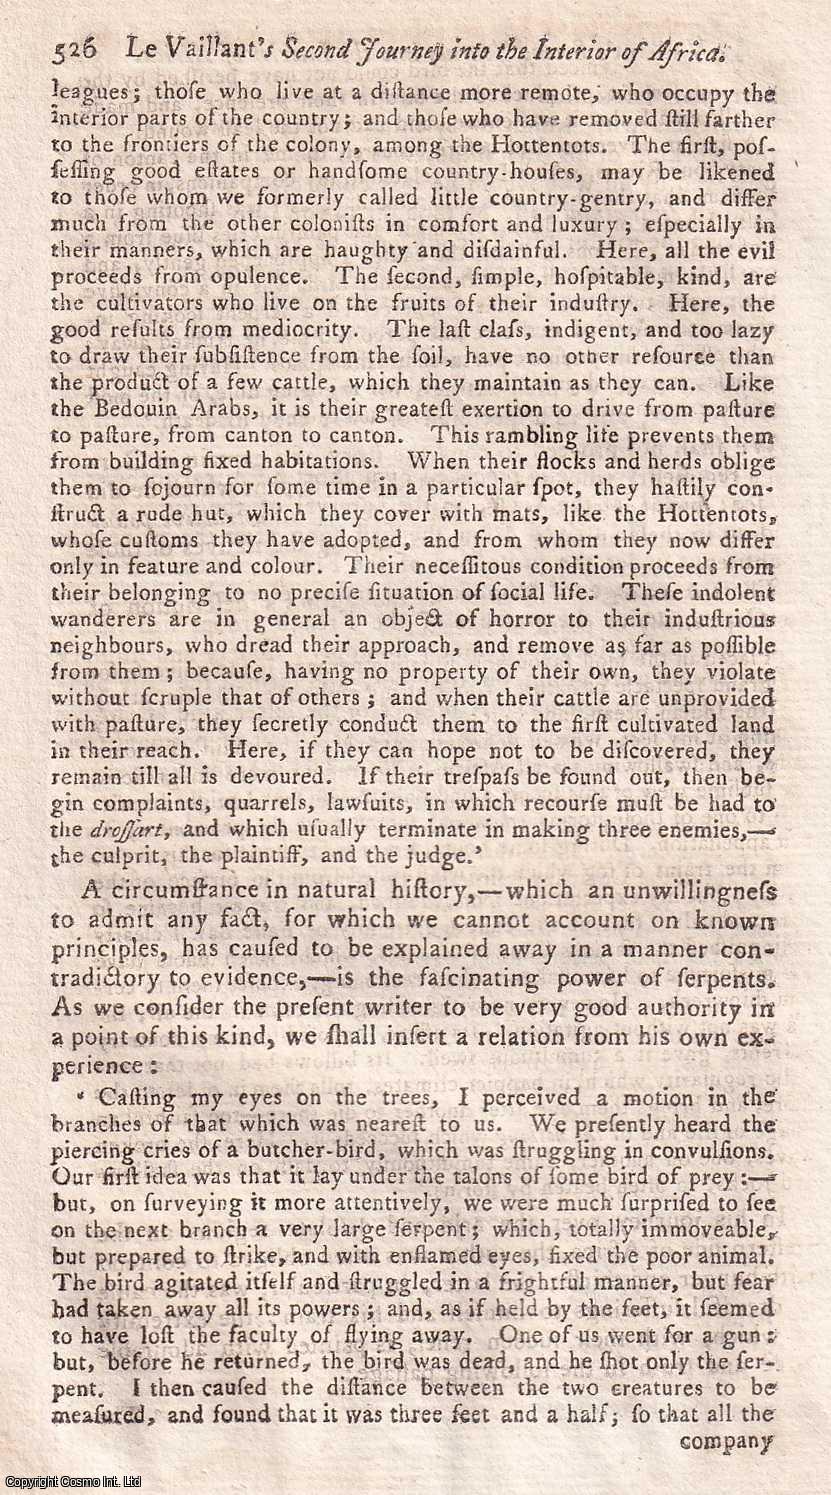 Author Not Stated - A Second Journey into the internal Parts of Africa, by the Cape of Good Hope, in 1783-85, by F. Le Vaillant. An original essay from the Monthly Review, 1796. No author is given for this article.